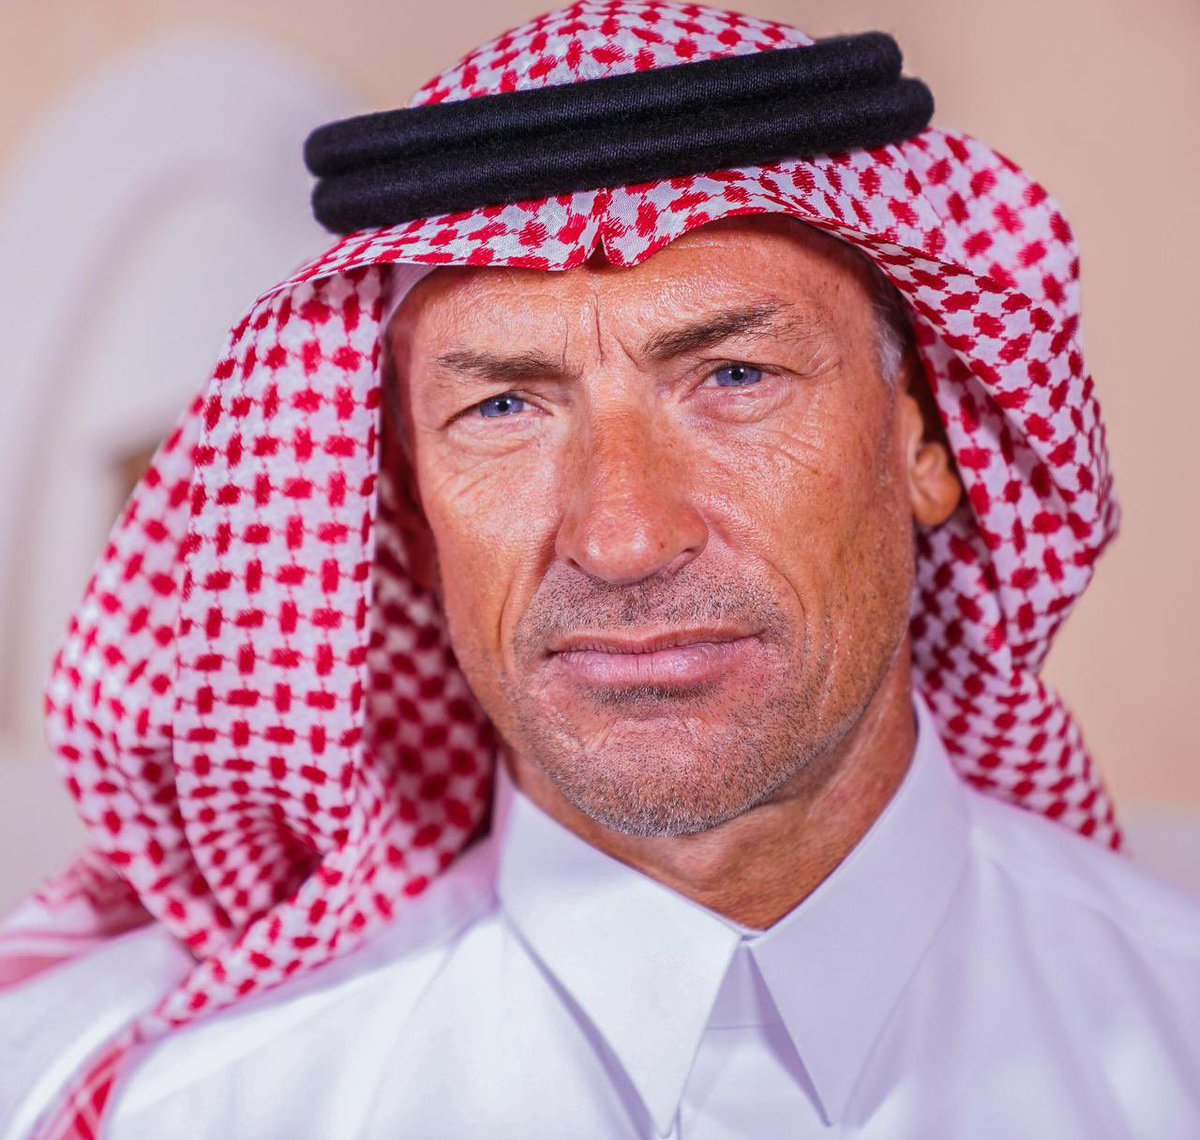 Warm wishes to every Saudi On occasion of the Saudi National Day 🇸🇦💚
May this country thrive and prosper forever 🙏🏼
#HervéRenard #SaudiArabia #NationalDay